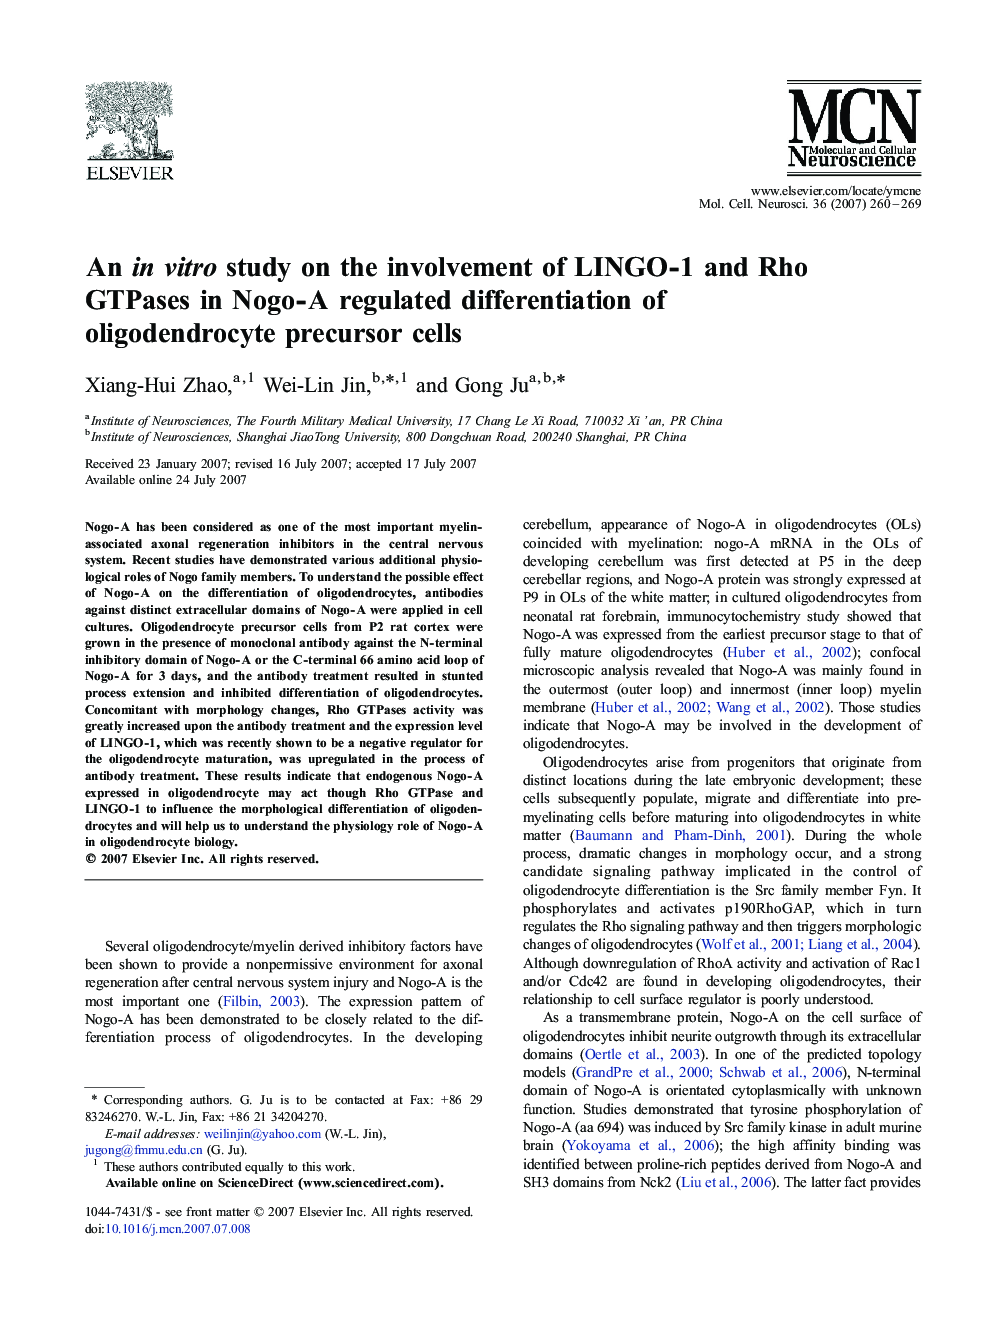 An in vitro study on the involvement of LINGO-1 and Rho GTPases in Nogo-A regulated differentiation of oligodendrocyte precursor cells